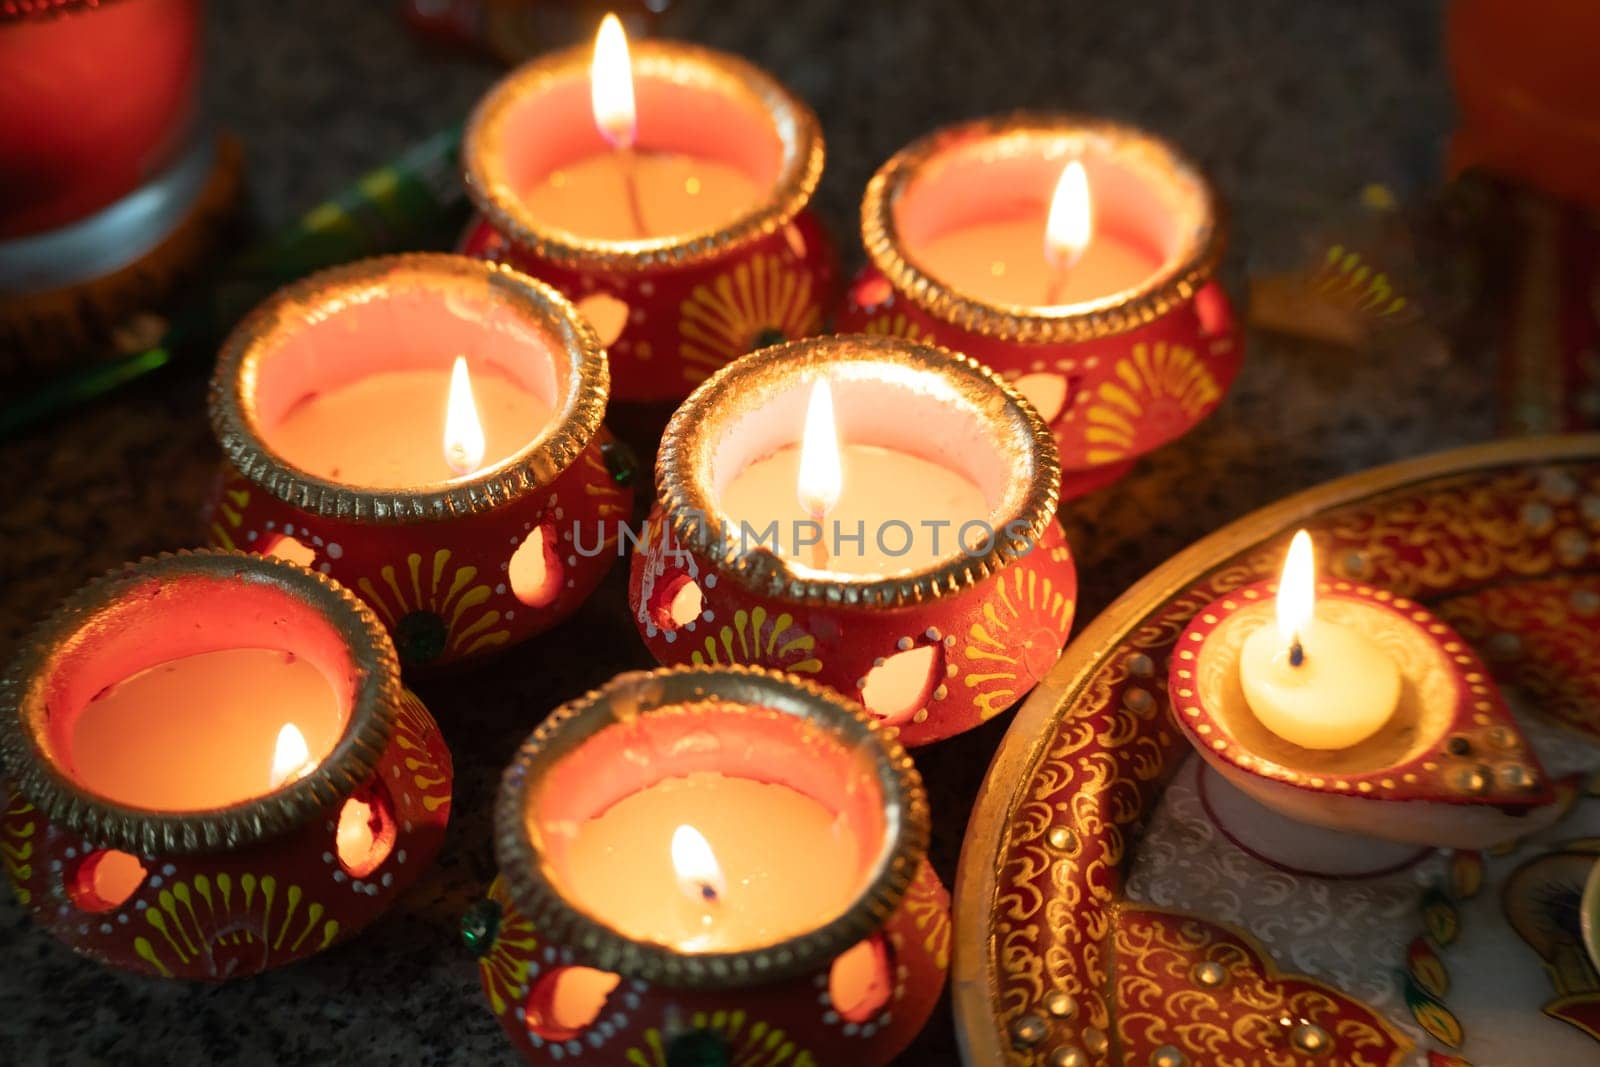 beautifully decorated diyas lit on the eve of diwali and the Ram temple Pran Pratishtha consecration celebrated across India and globally by hindu devotees